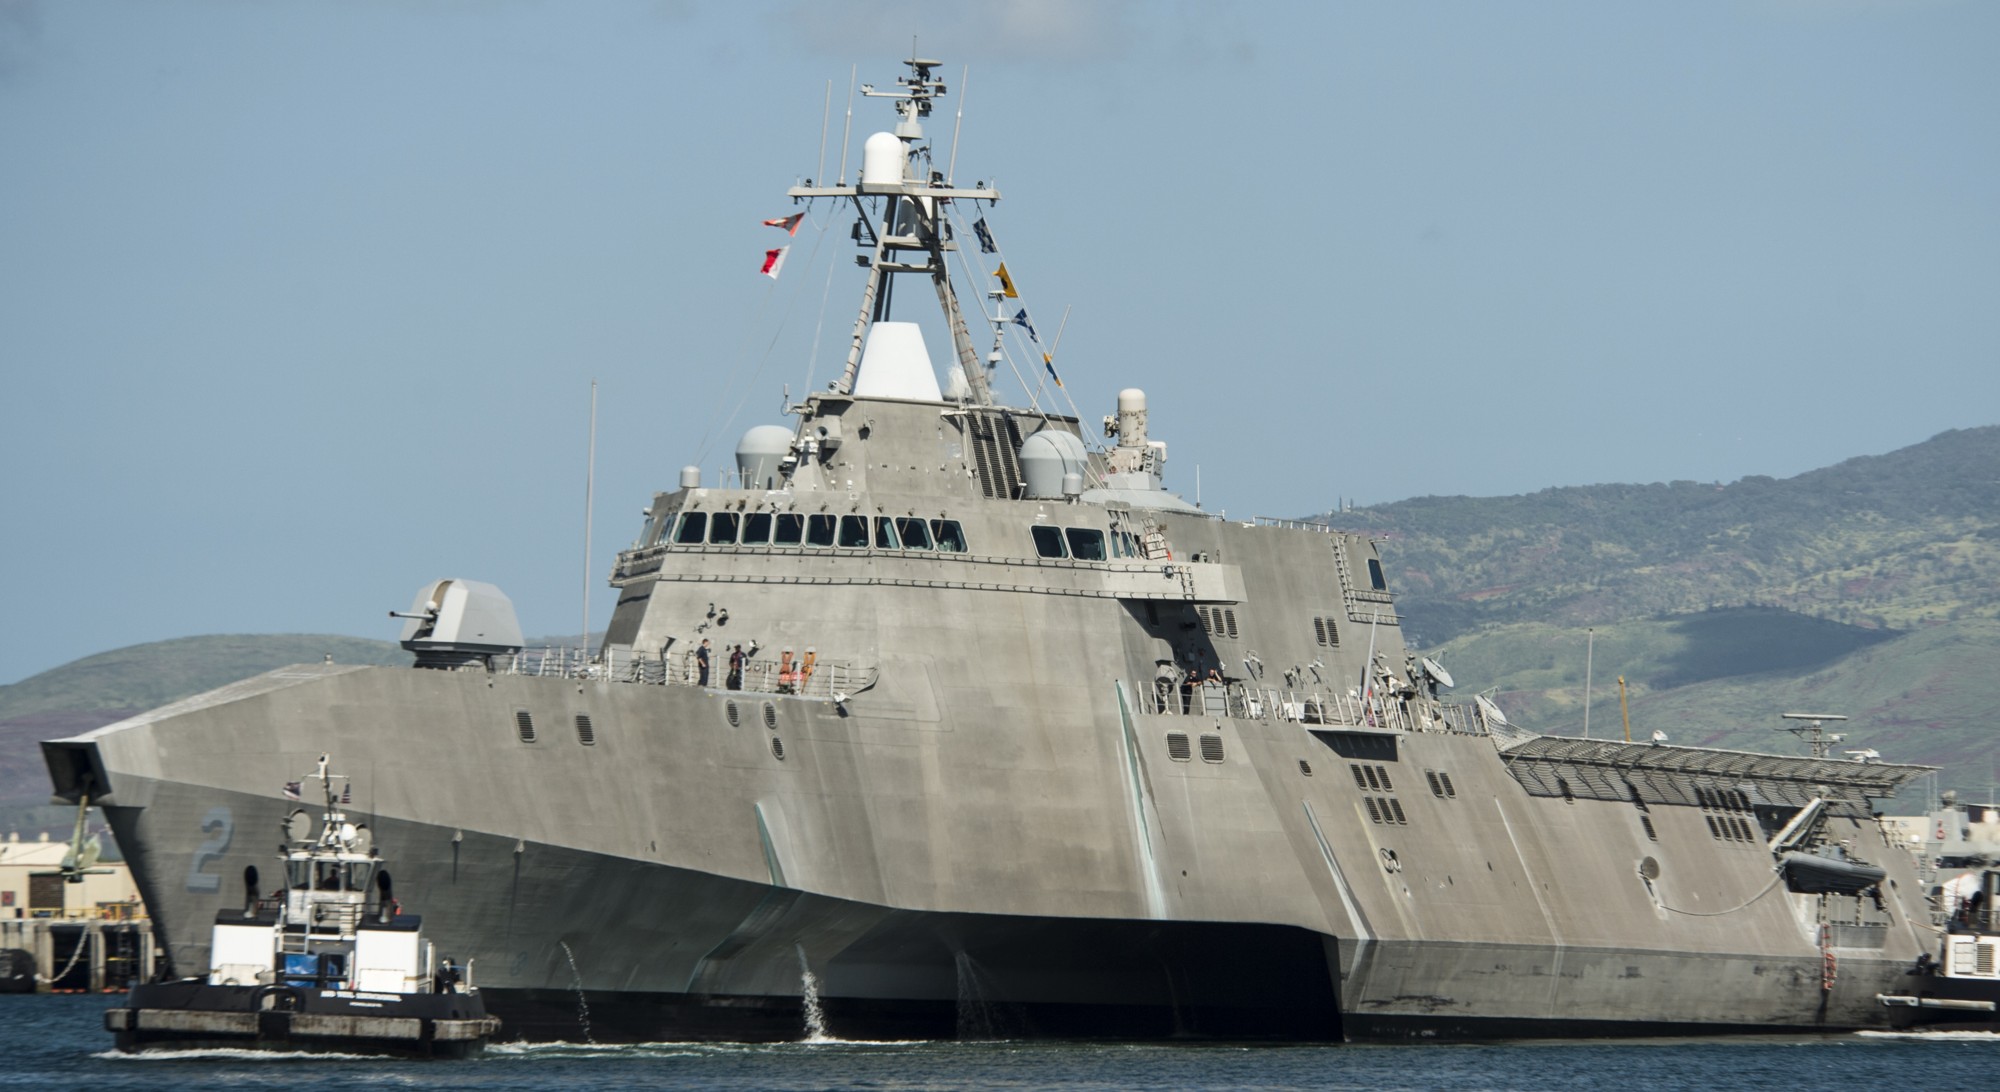 lcs-2 uss independence littoral combat ship us navy class 32 pearl harbor hawaii